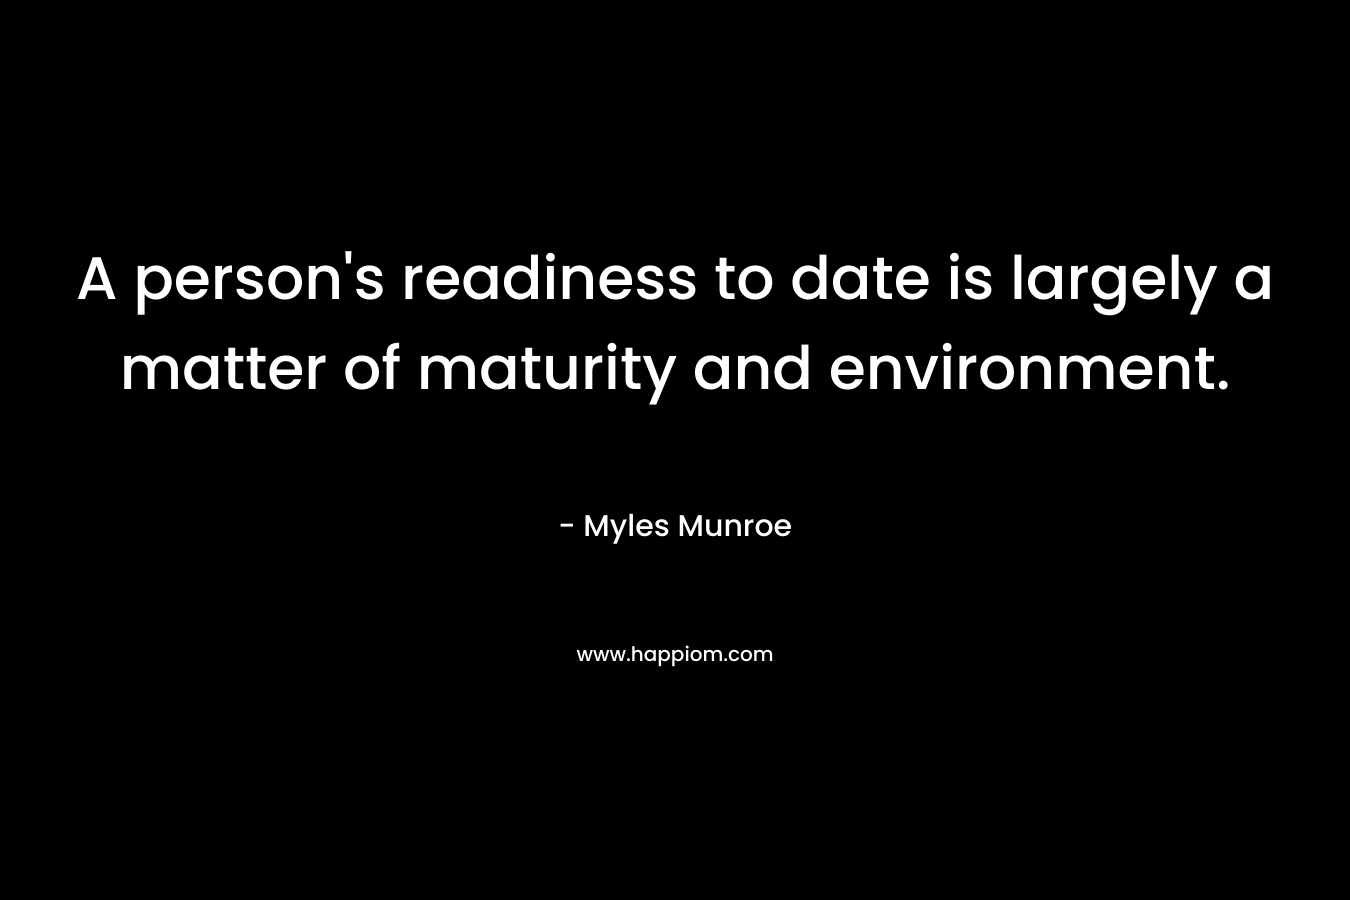 A person’s readiness to date is largely a matter of maturity and environment. – Myles Munroe